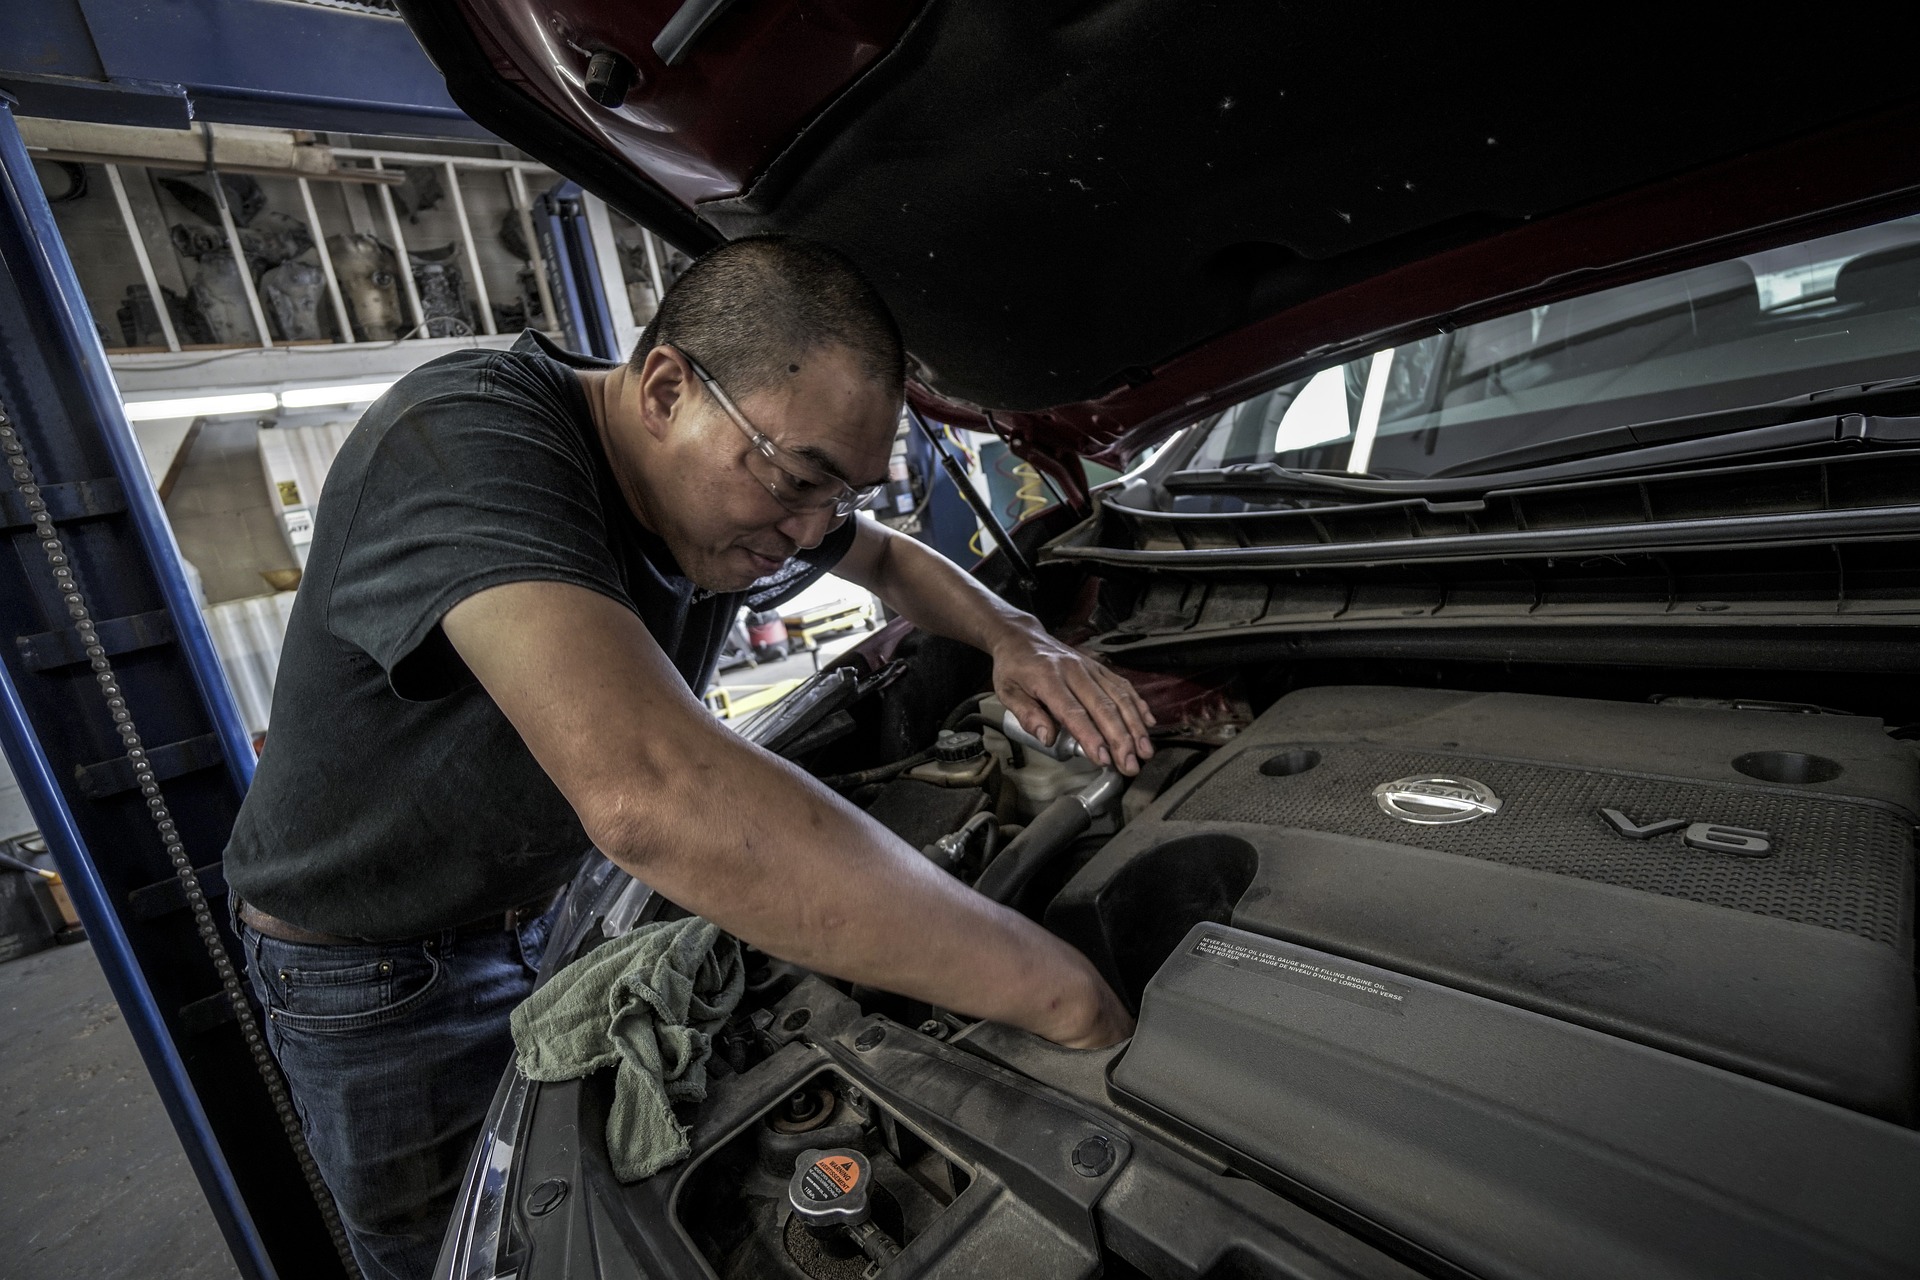 When should you service your vehicle?